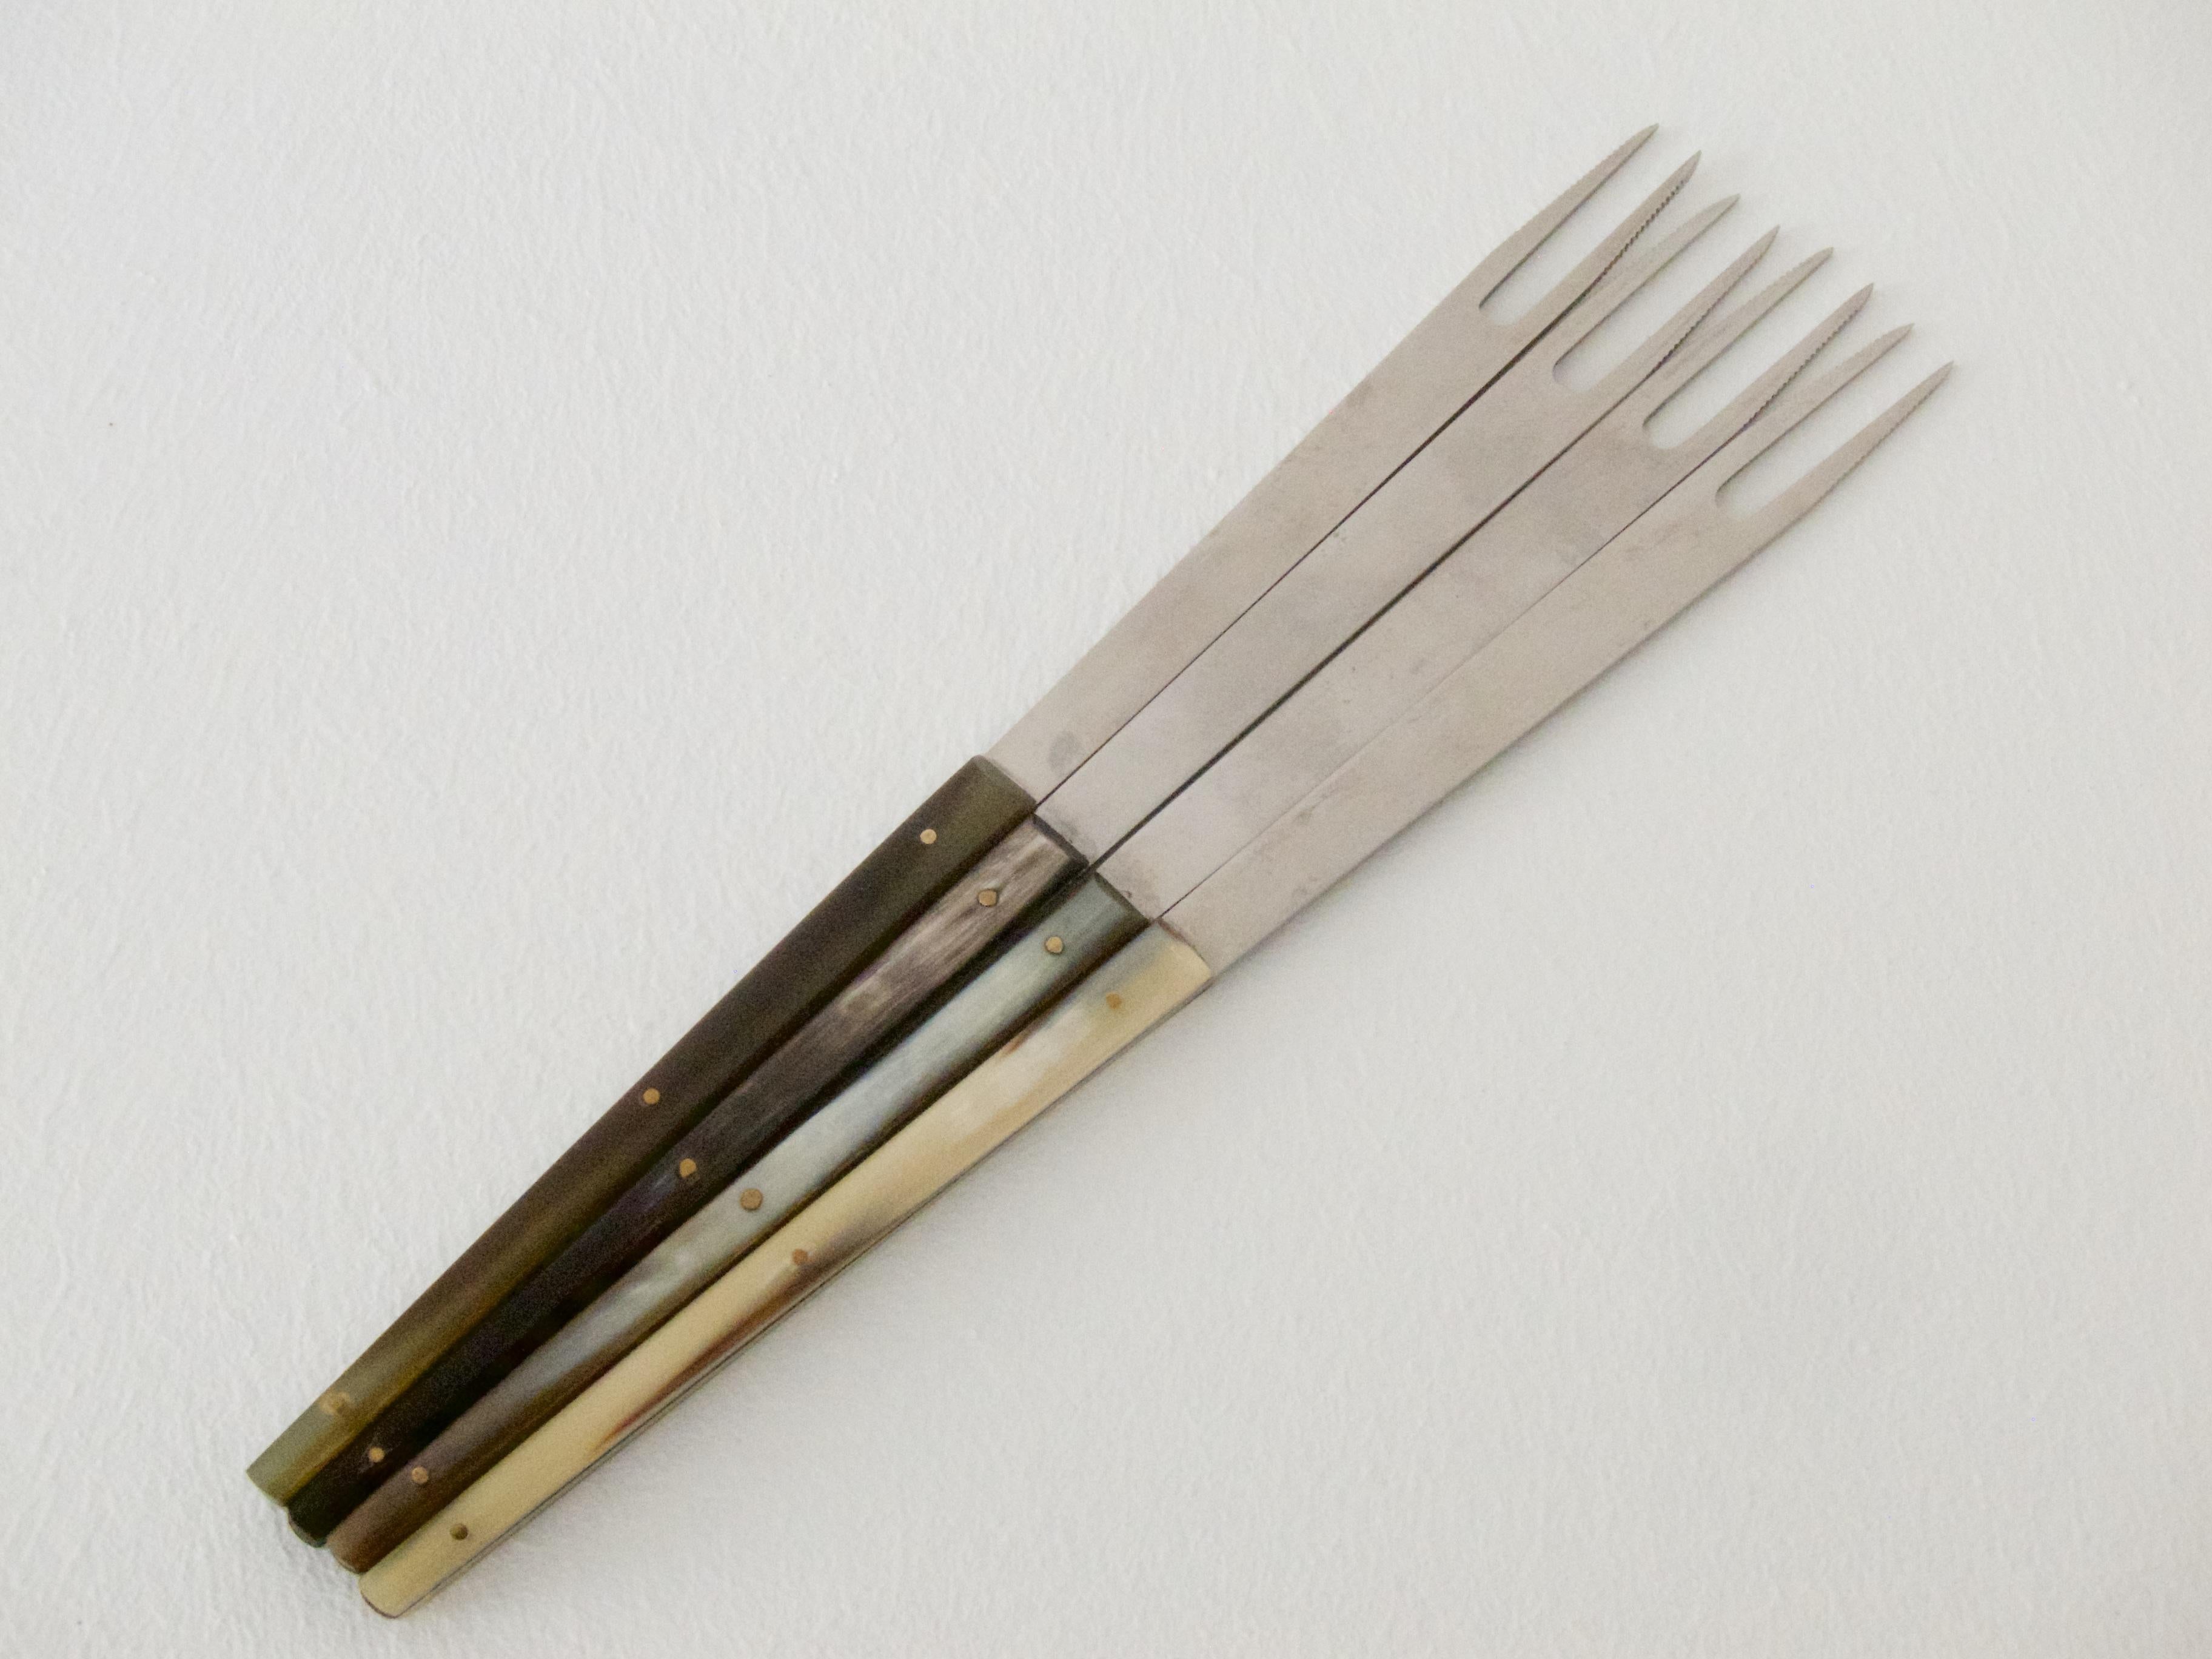 A set of 4 beautiful fondue forks by Carl Auböck.

Marked: Amboss logo, AUBÖCK, STAINLESS AUSTRIA
Stainless Steel, Horn
Measures: L 24.5 cm / 9.65 in

Good condition with minor traces of aging and usage!